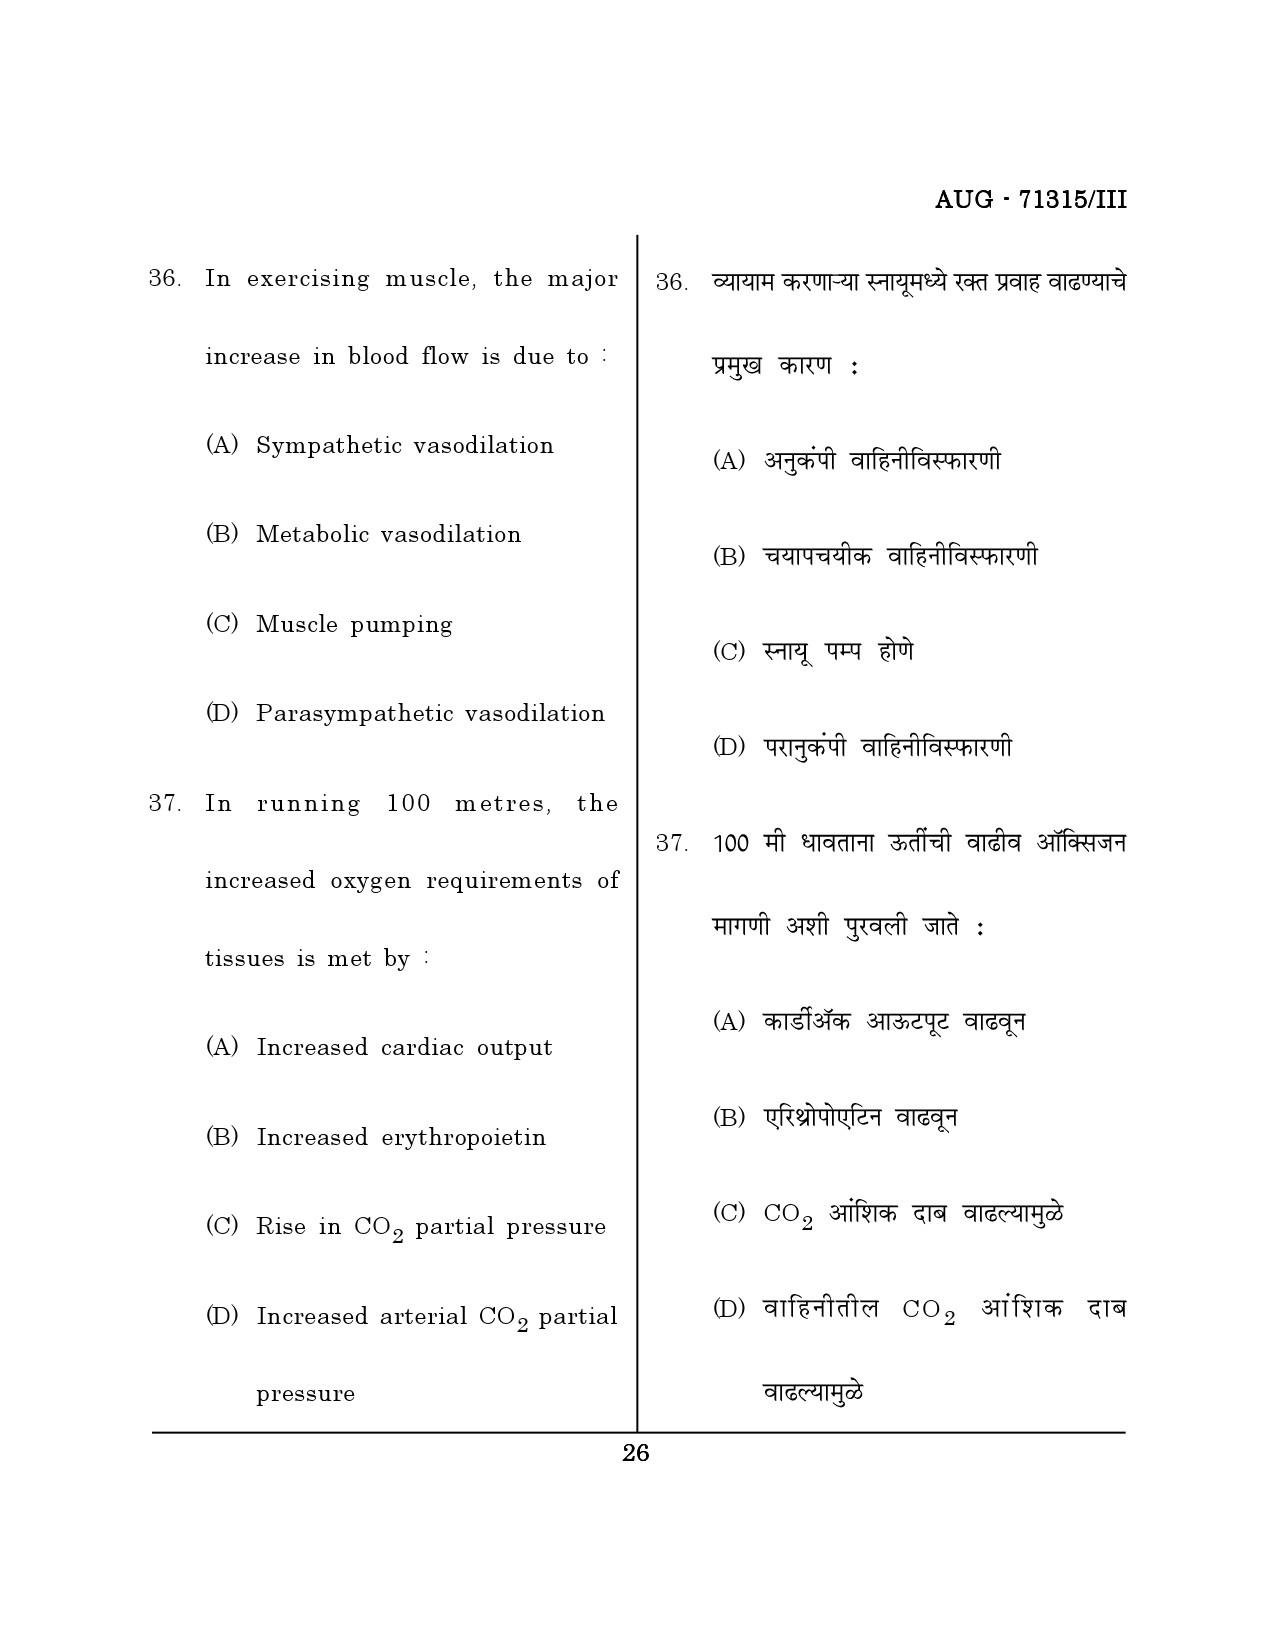 Maharashtra SET Physical Education Question Paper III August 2015 25